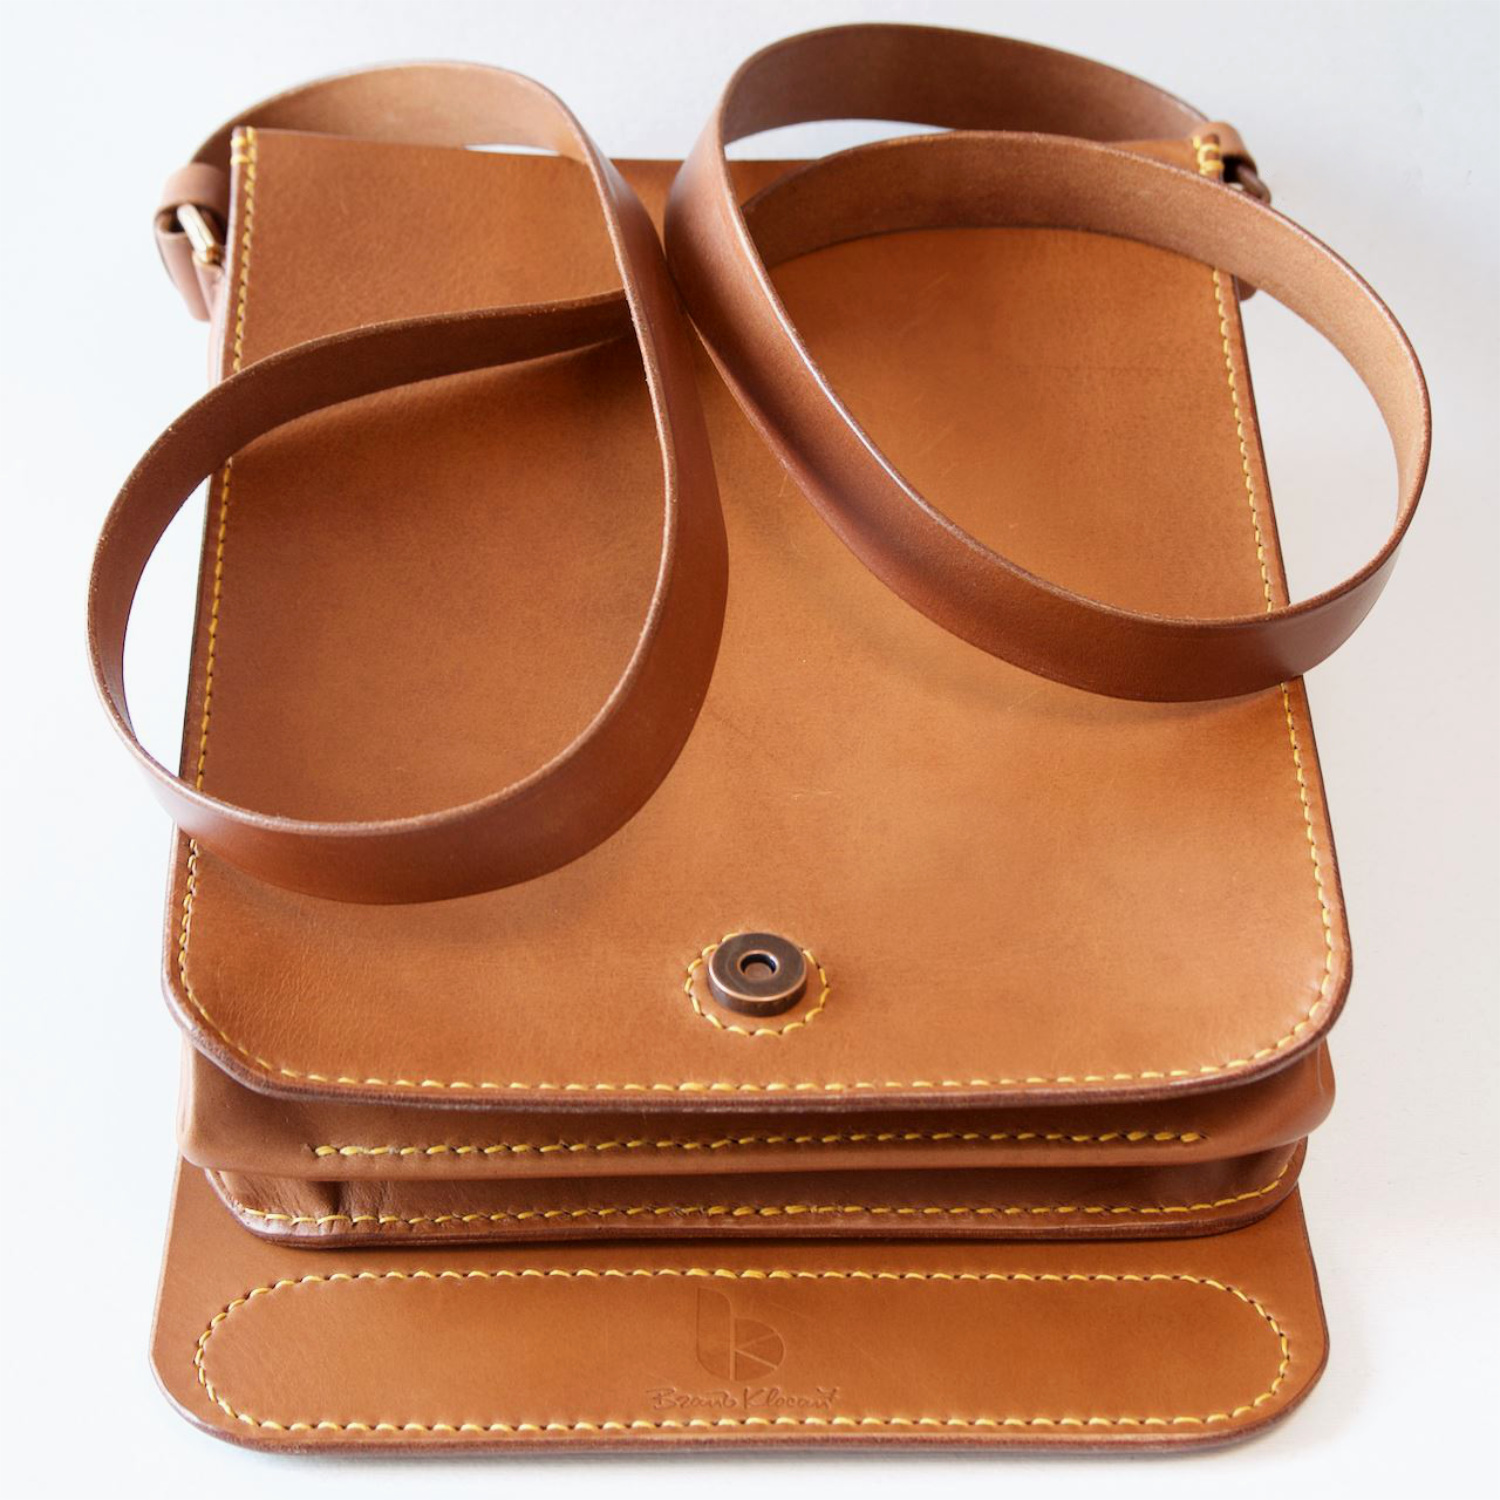 leather messenger bag with cover all flap closure detail